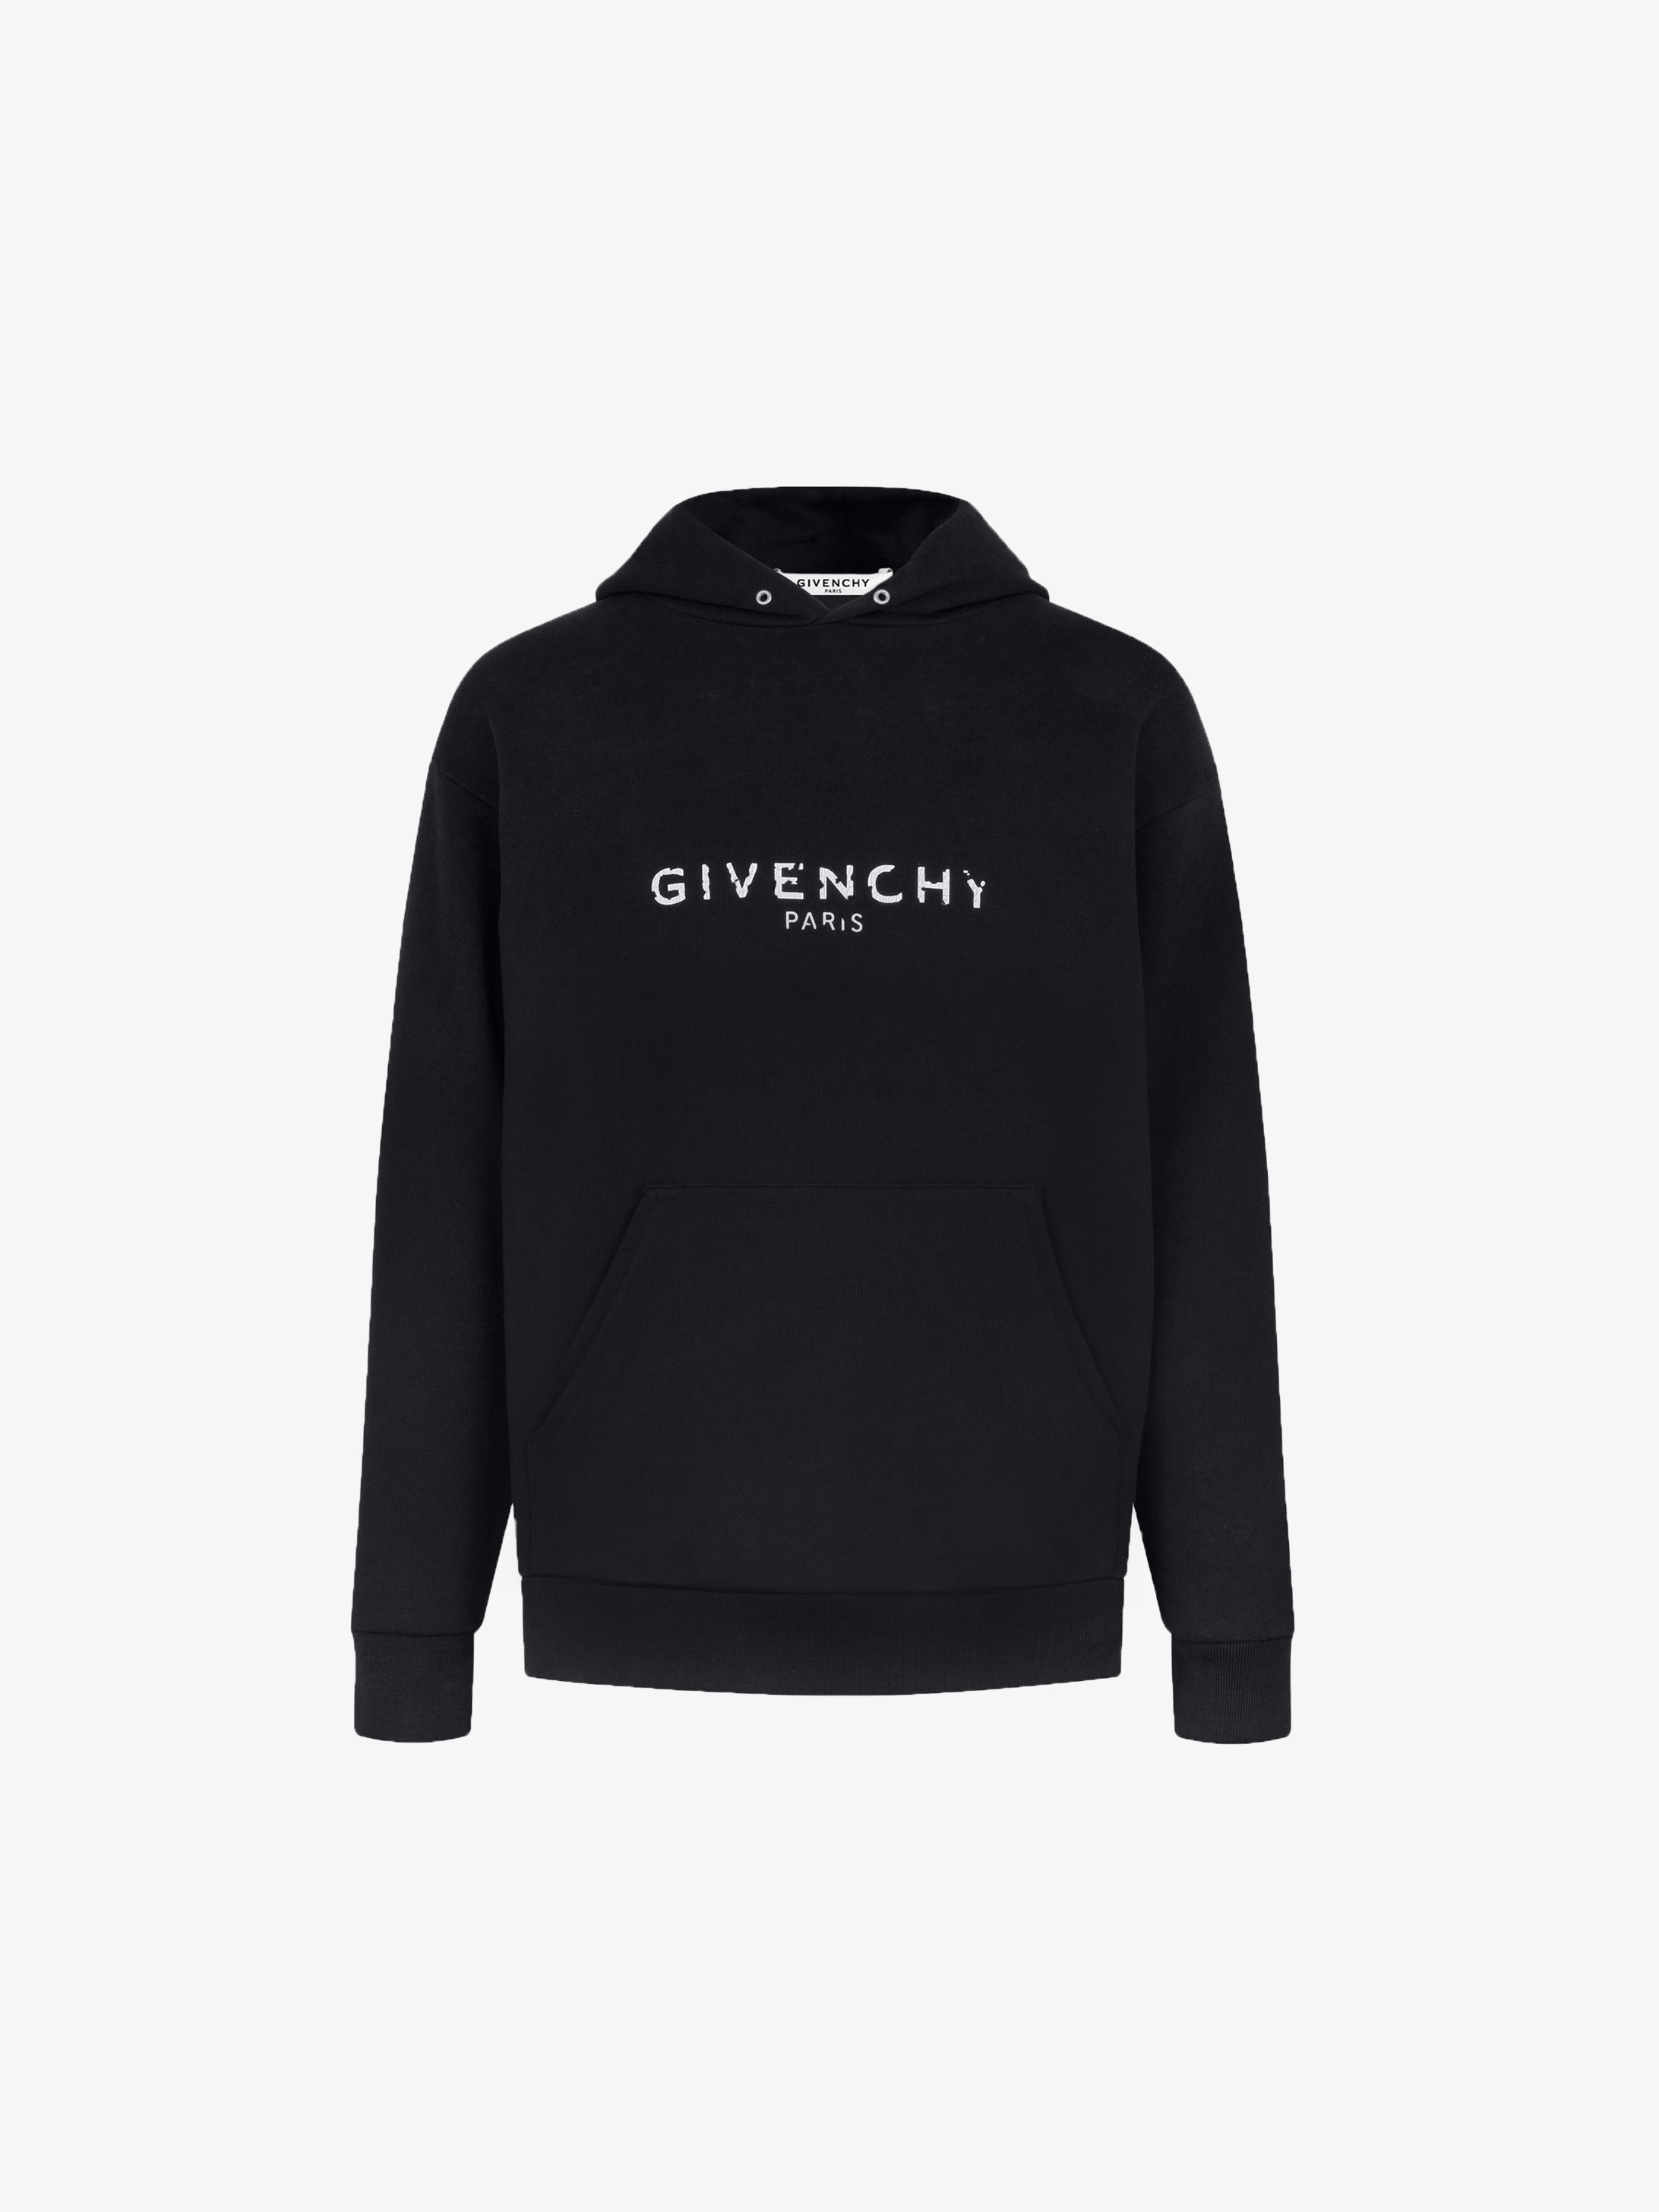 givenchy hoodie grey